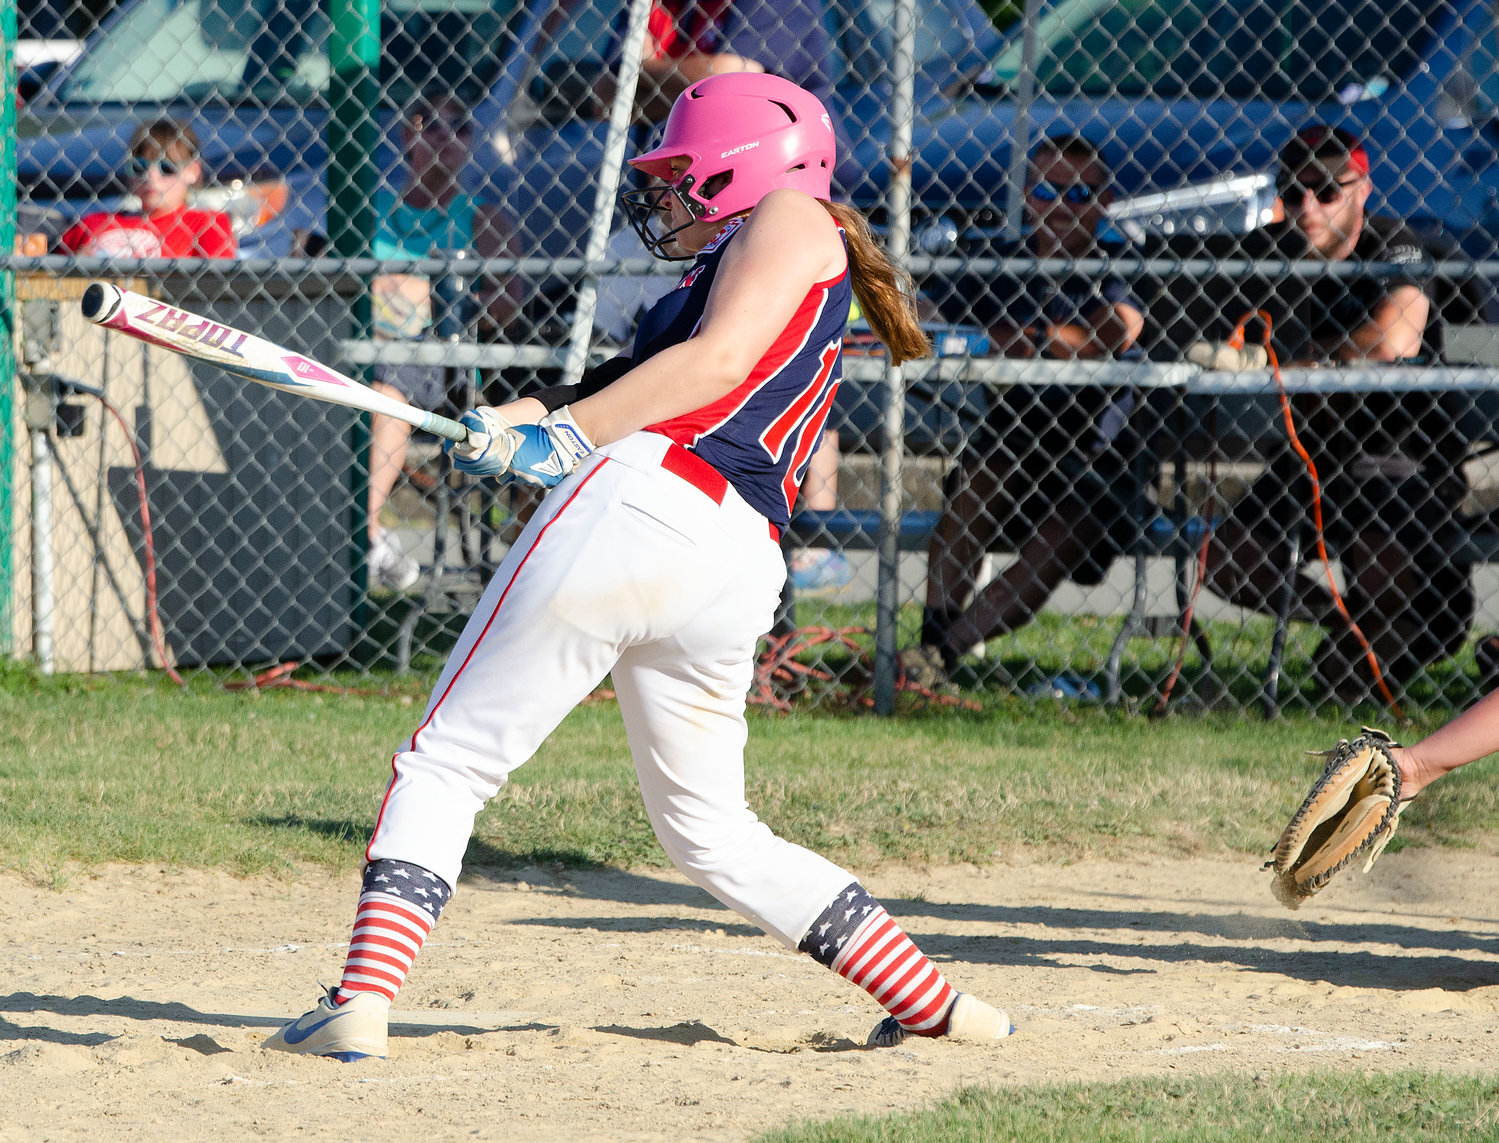 Carlie Martin belts a bases clearing line drive triple to right field in the second inning.